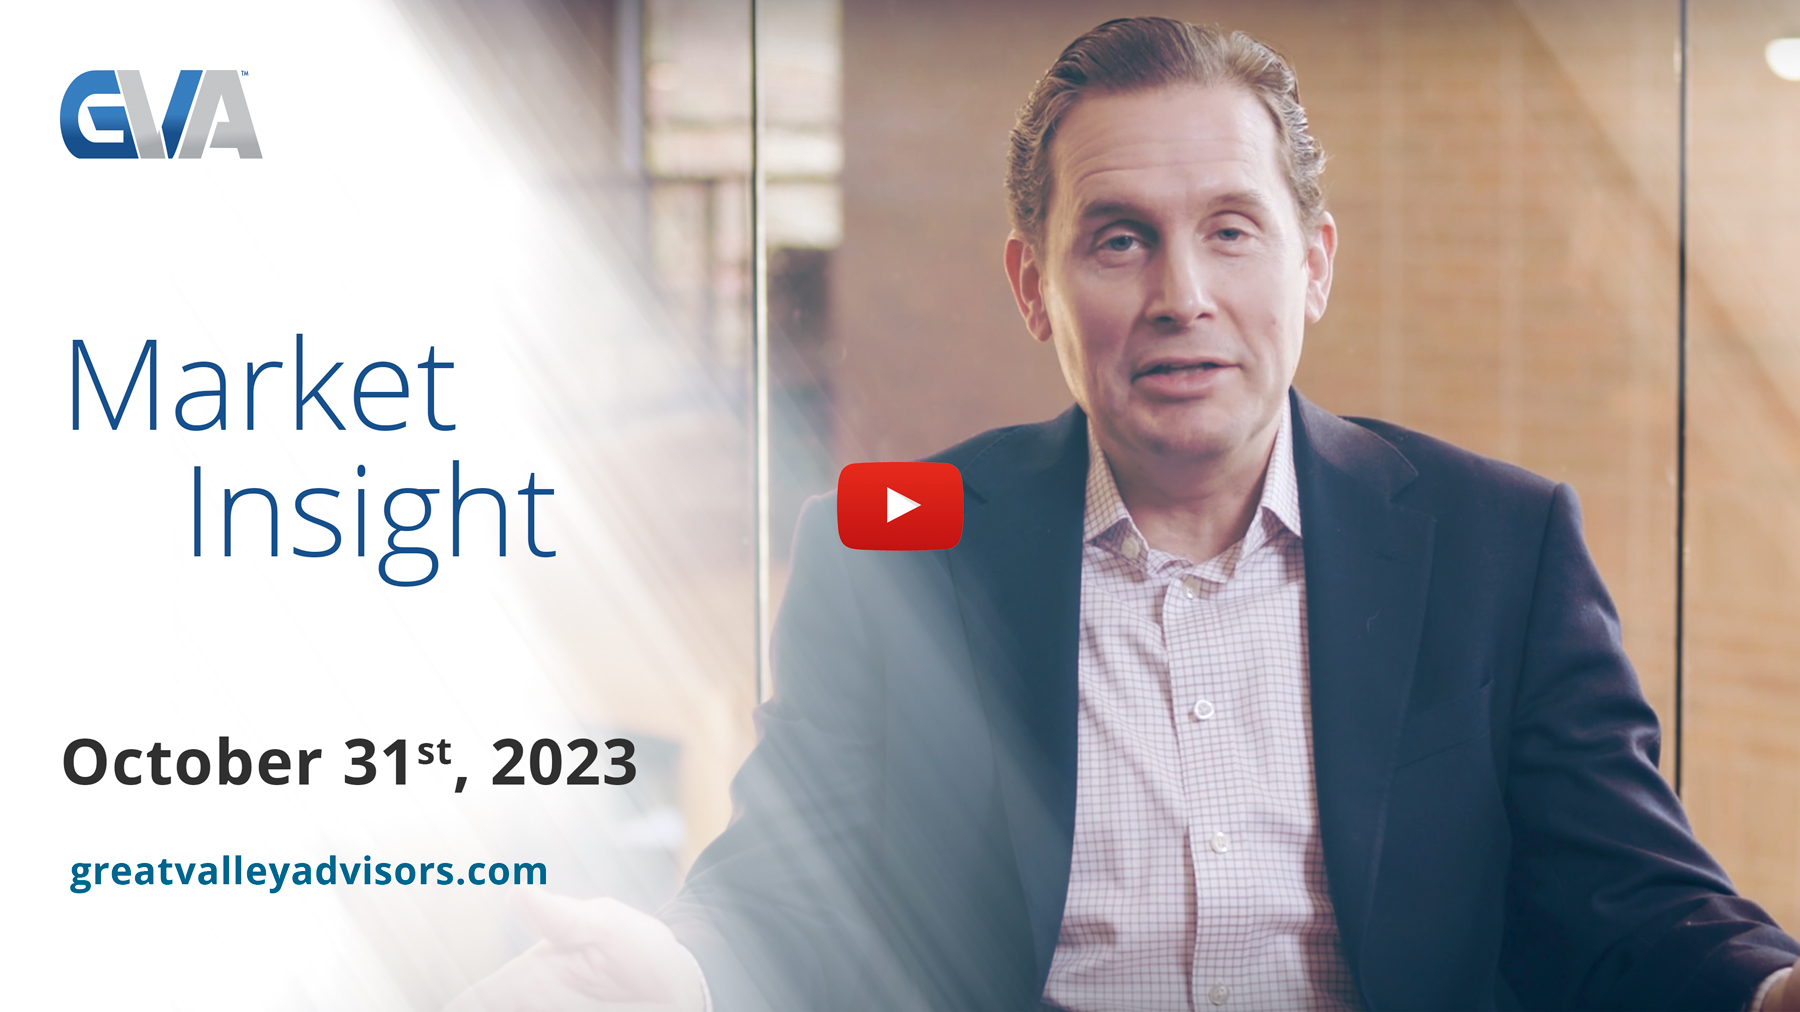 Market Insights with Eric: Episode 12, October 31st, 2023